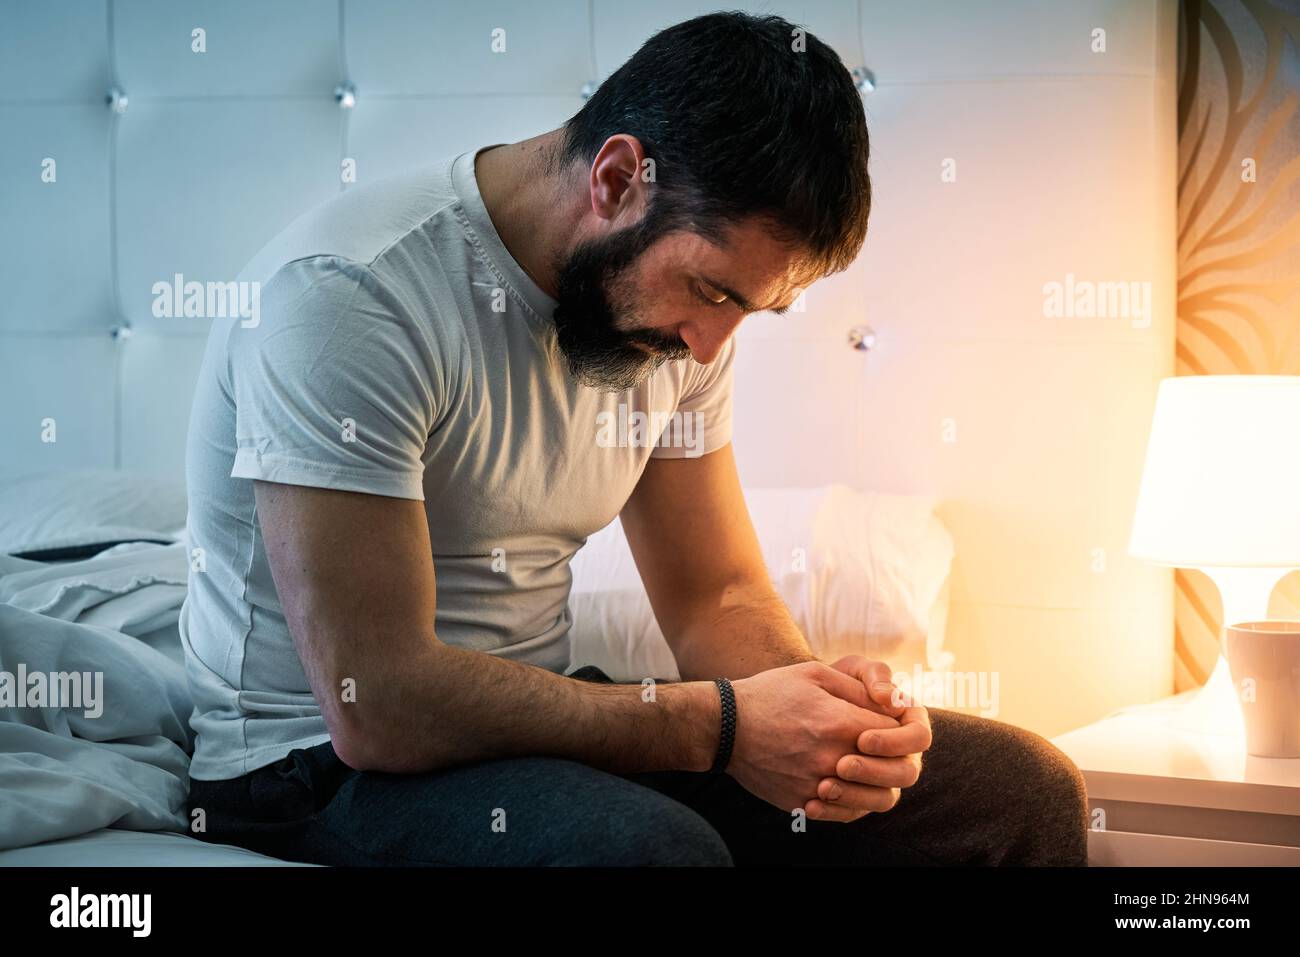 Person with some kind of problem sitting on the bed and with his head bowed. Stock Photo